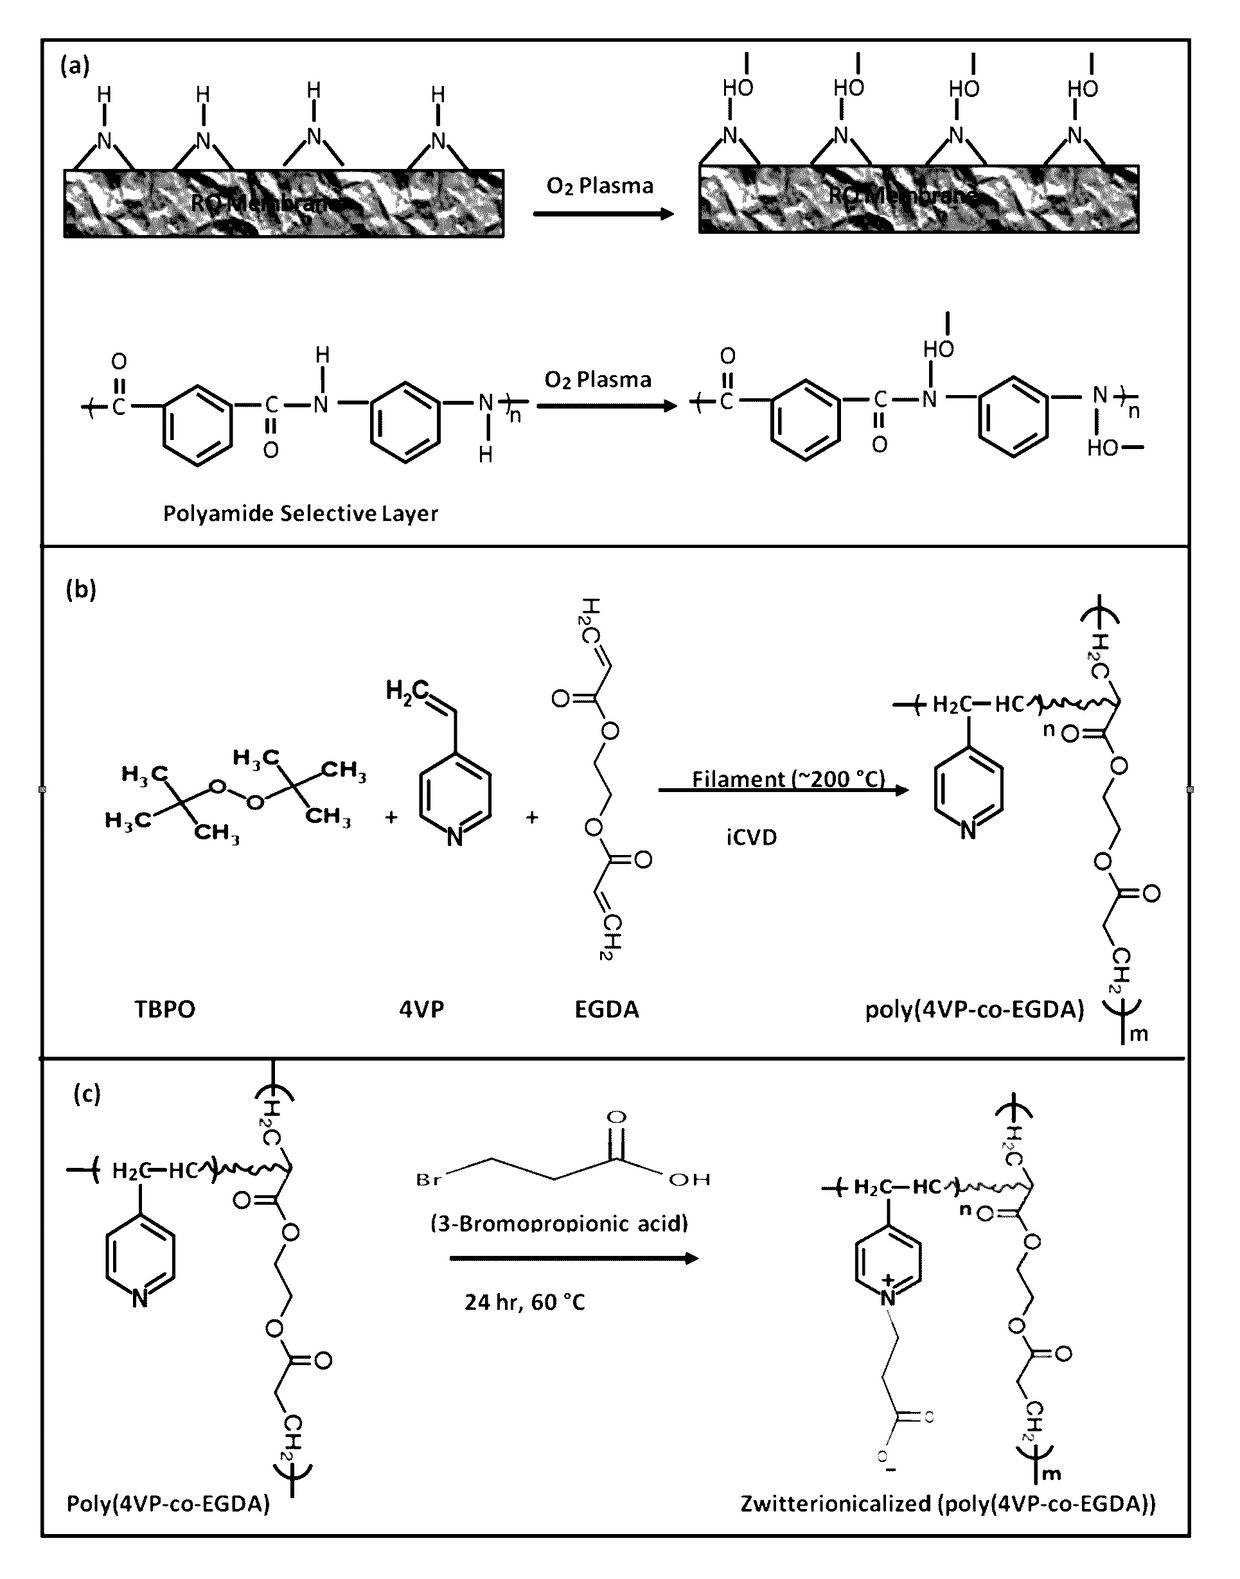 Development of zwitterionic coatings that confer ultra anti-biofouling properties to commercial reverse osmosis membranes